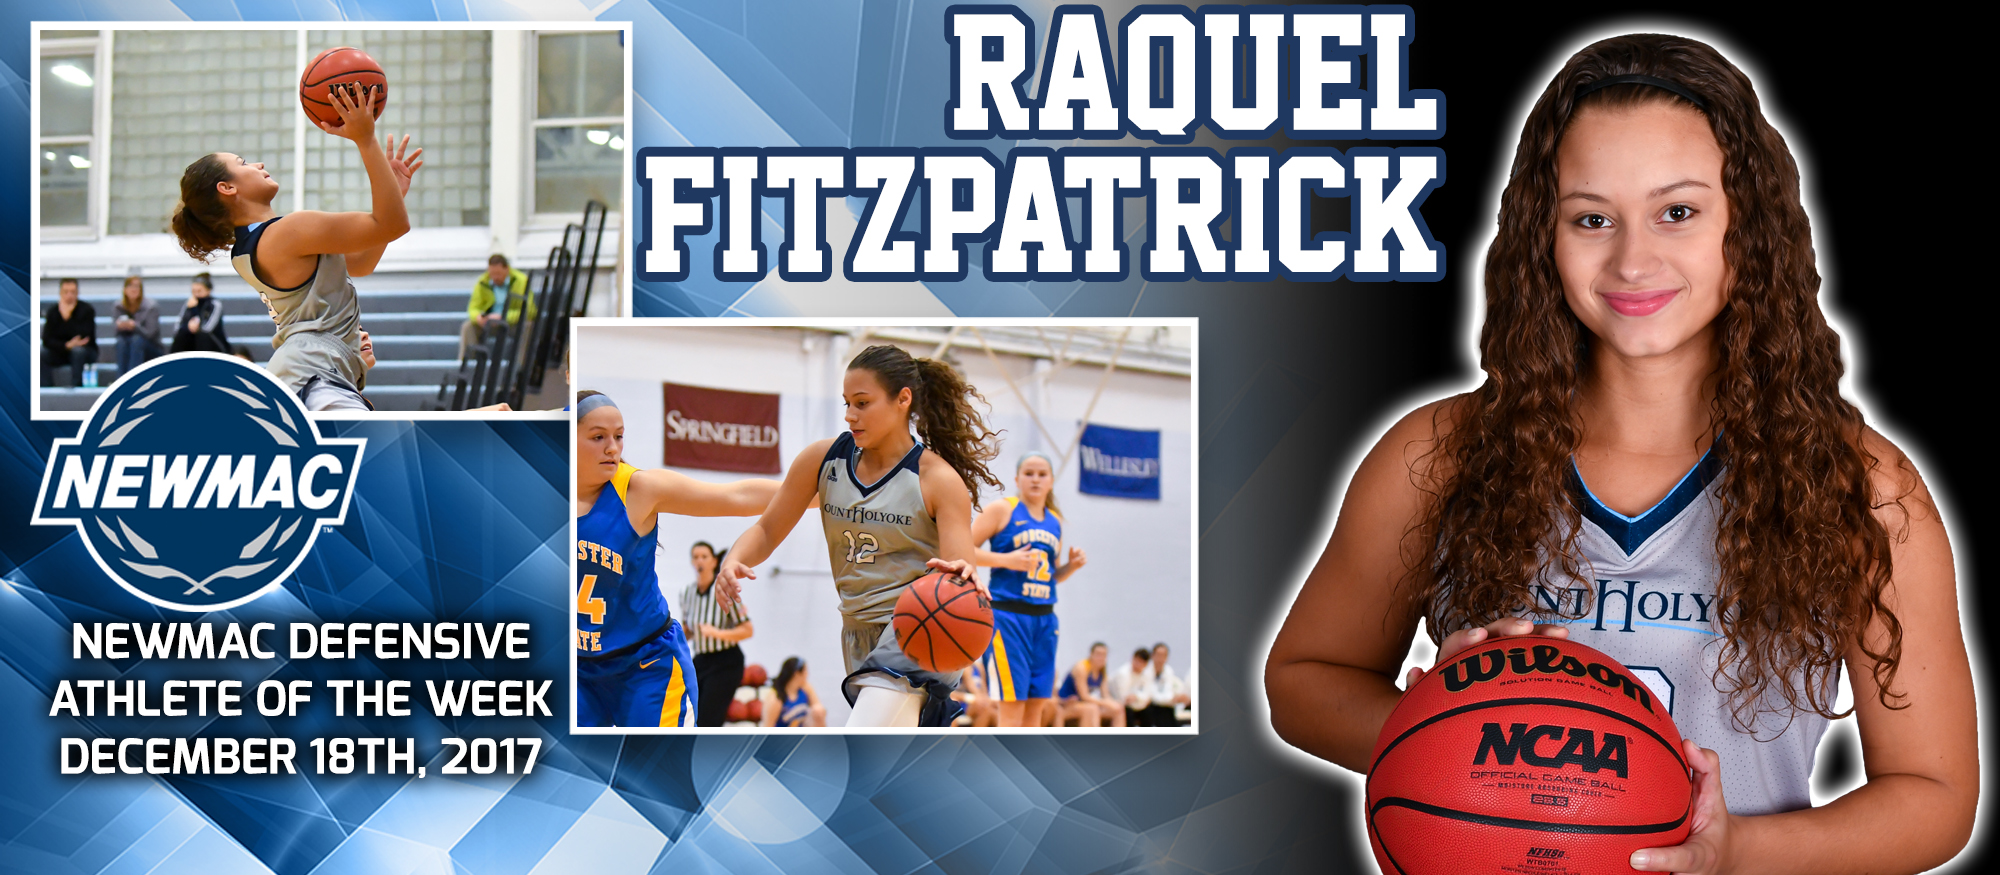 Graphic naming Lyons basketball player, Raquel Fitzpatrick the NEWMAC Defensive Athlete of the Week for December 18, 2017.